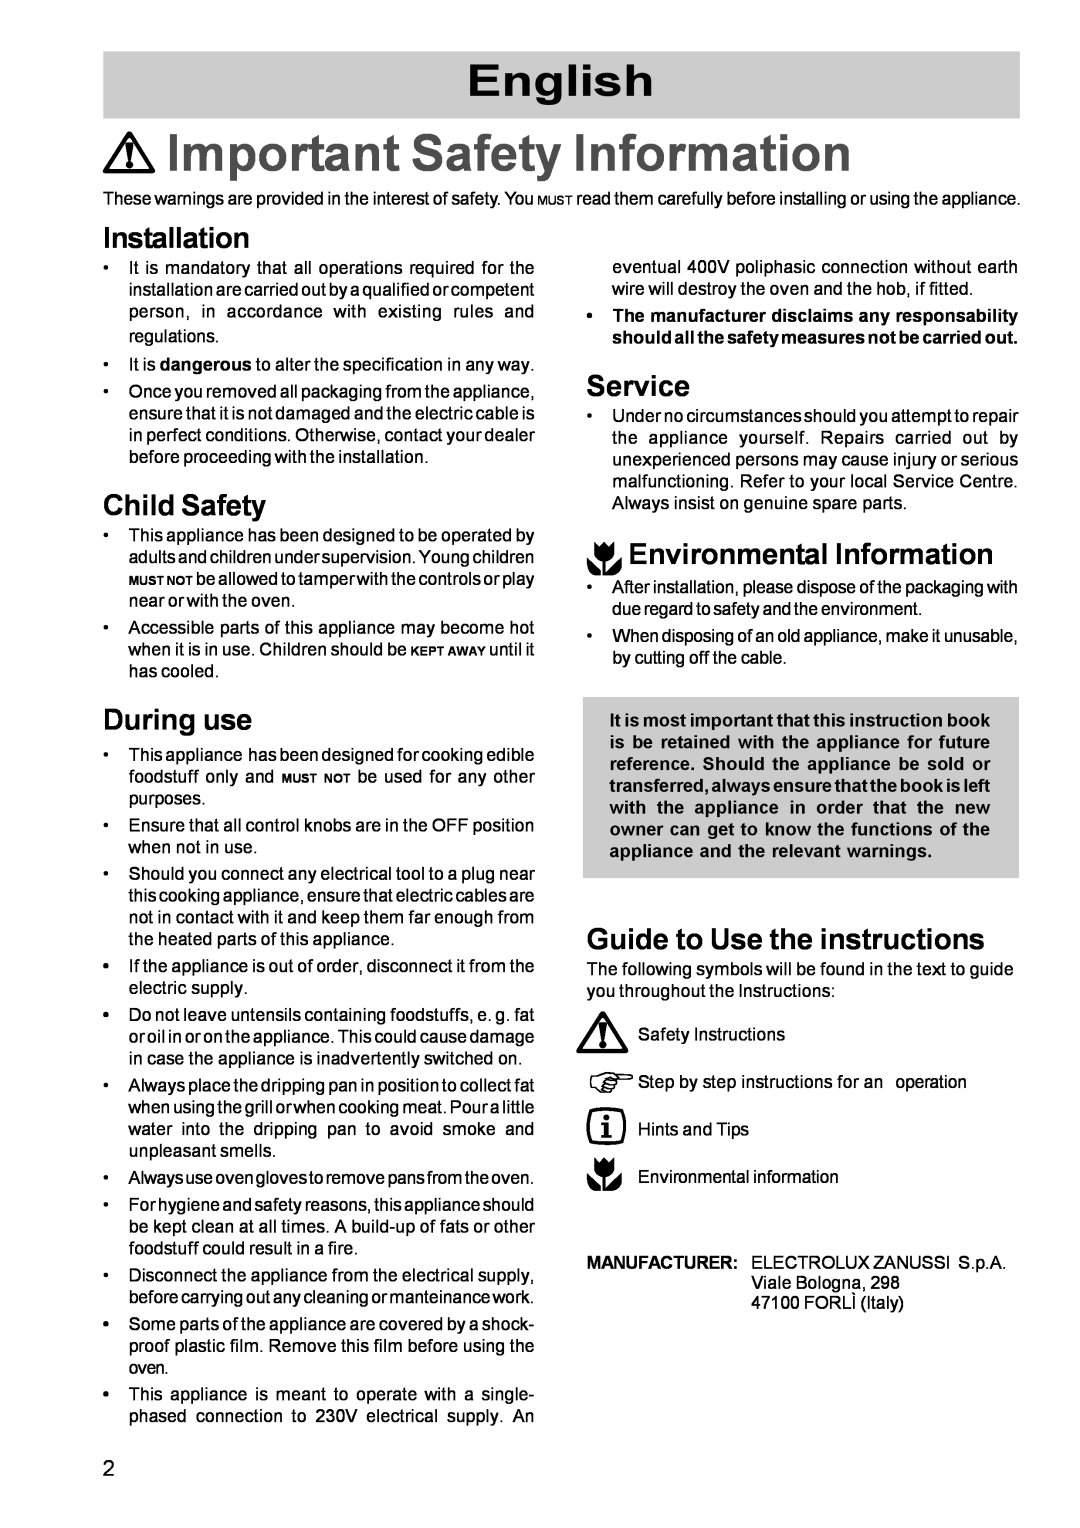 Zanussi ZBF 610 Installation, Child Safety, During use, Service, Environmental Information, Guide to Use the instructions 